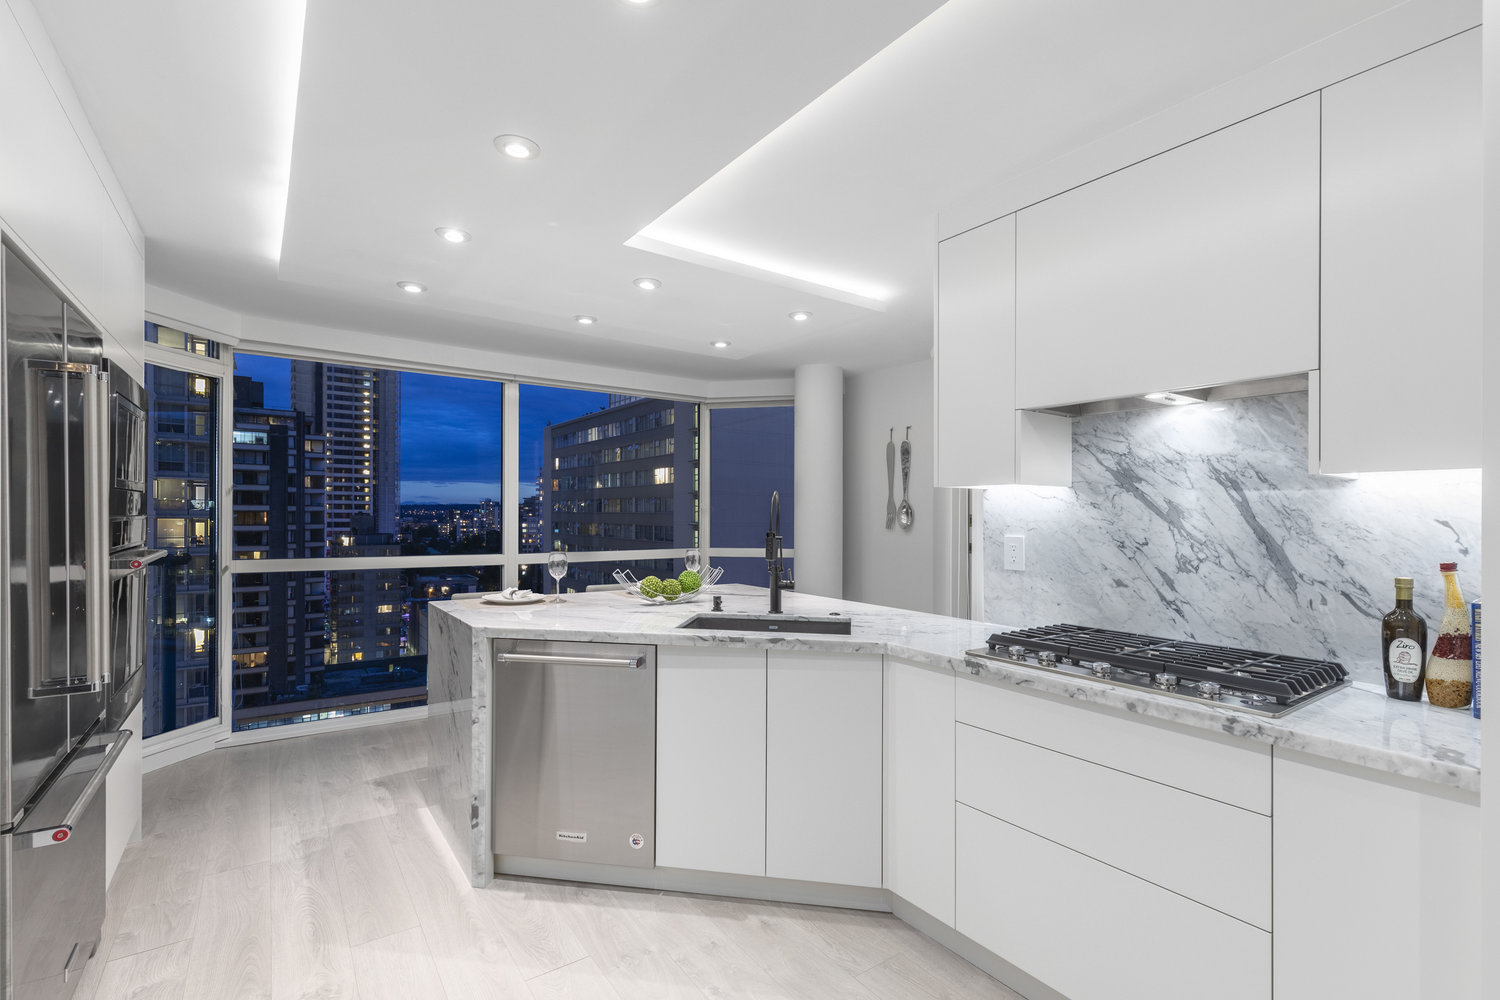 Project Highlight: Kitchen, Bathroom Renovations with Enzo Design Build